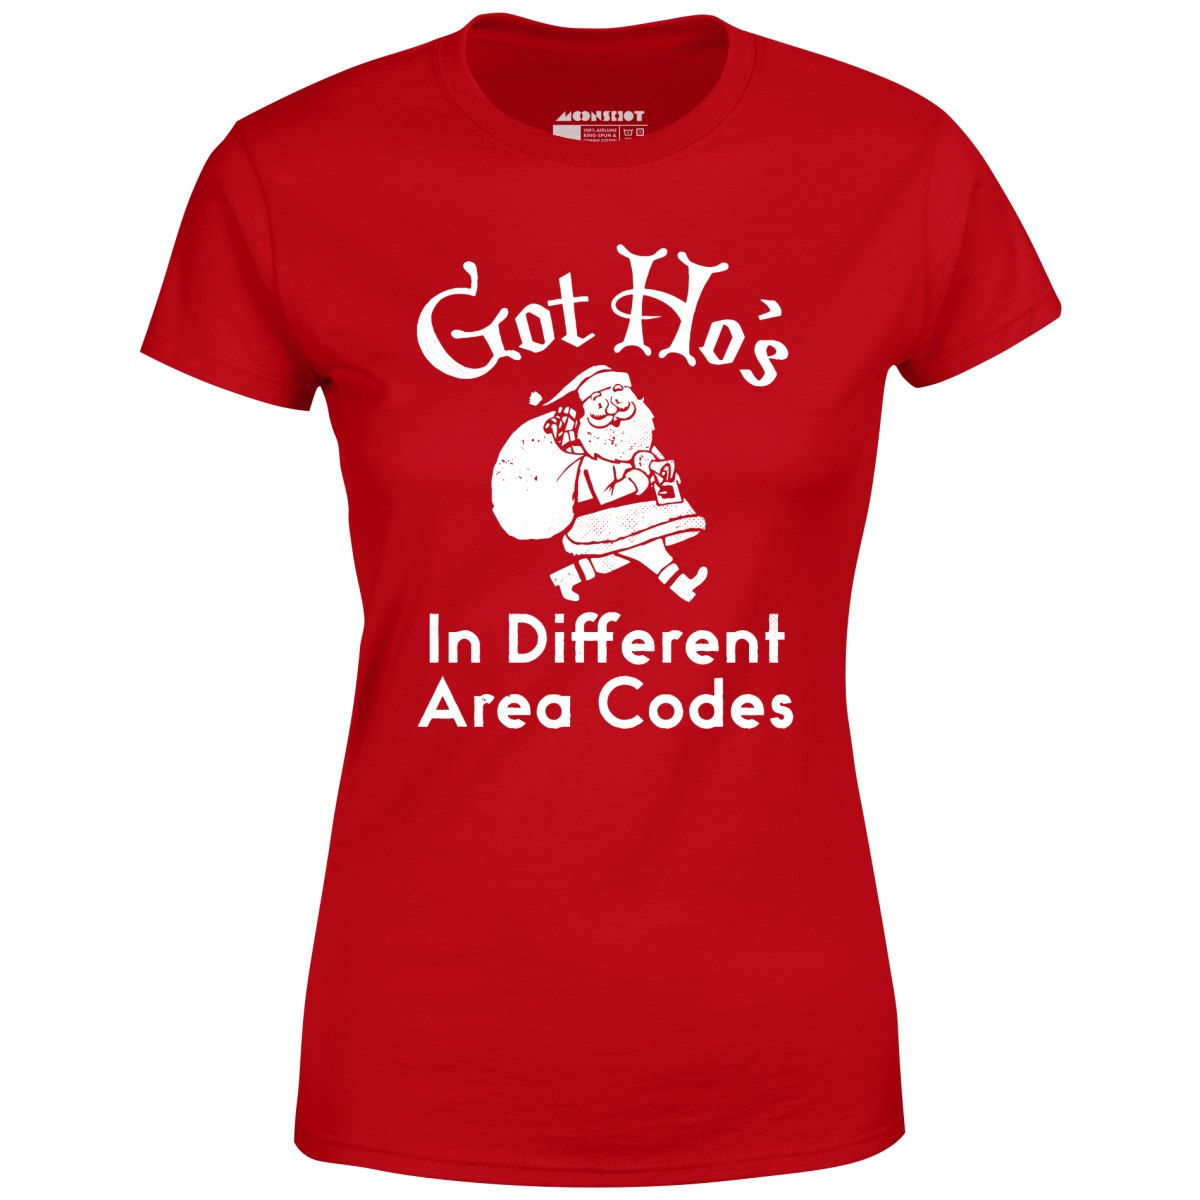 Got Ho's in Different Area Codes - Women's T-Shirt